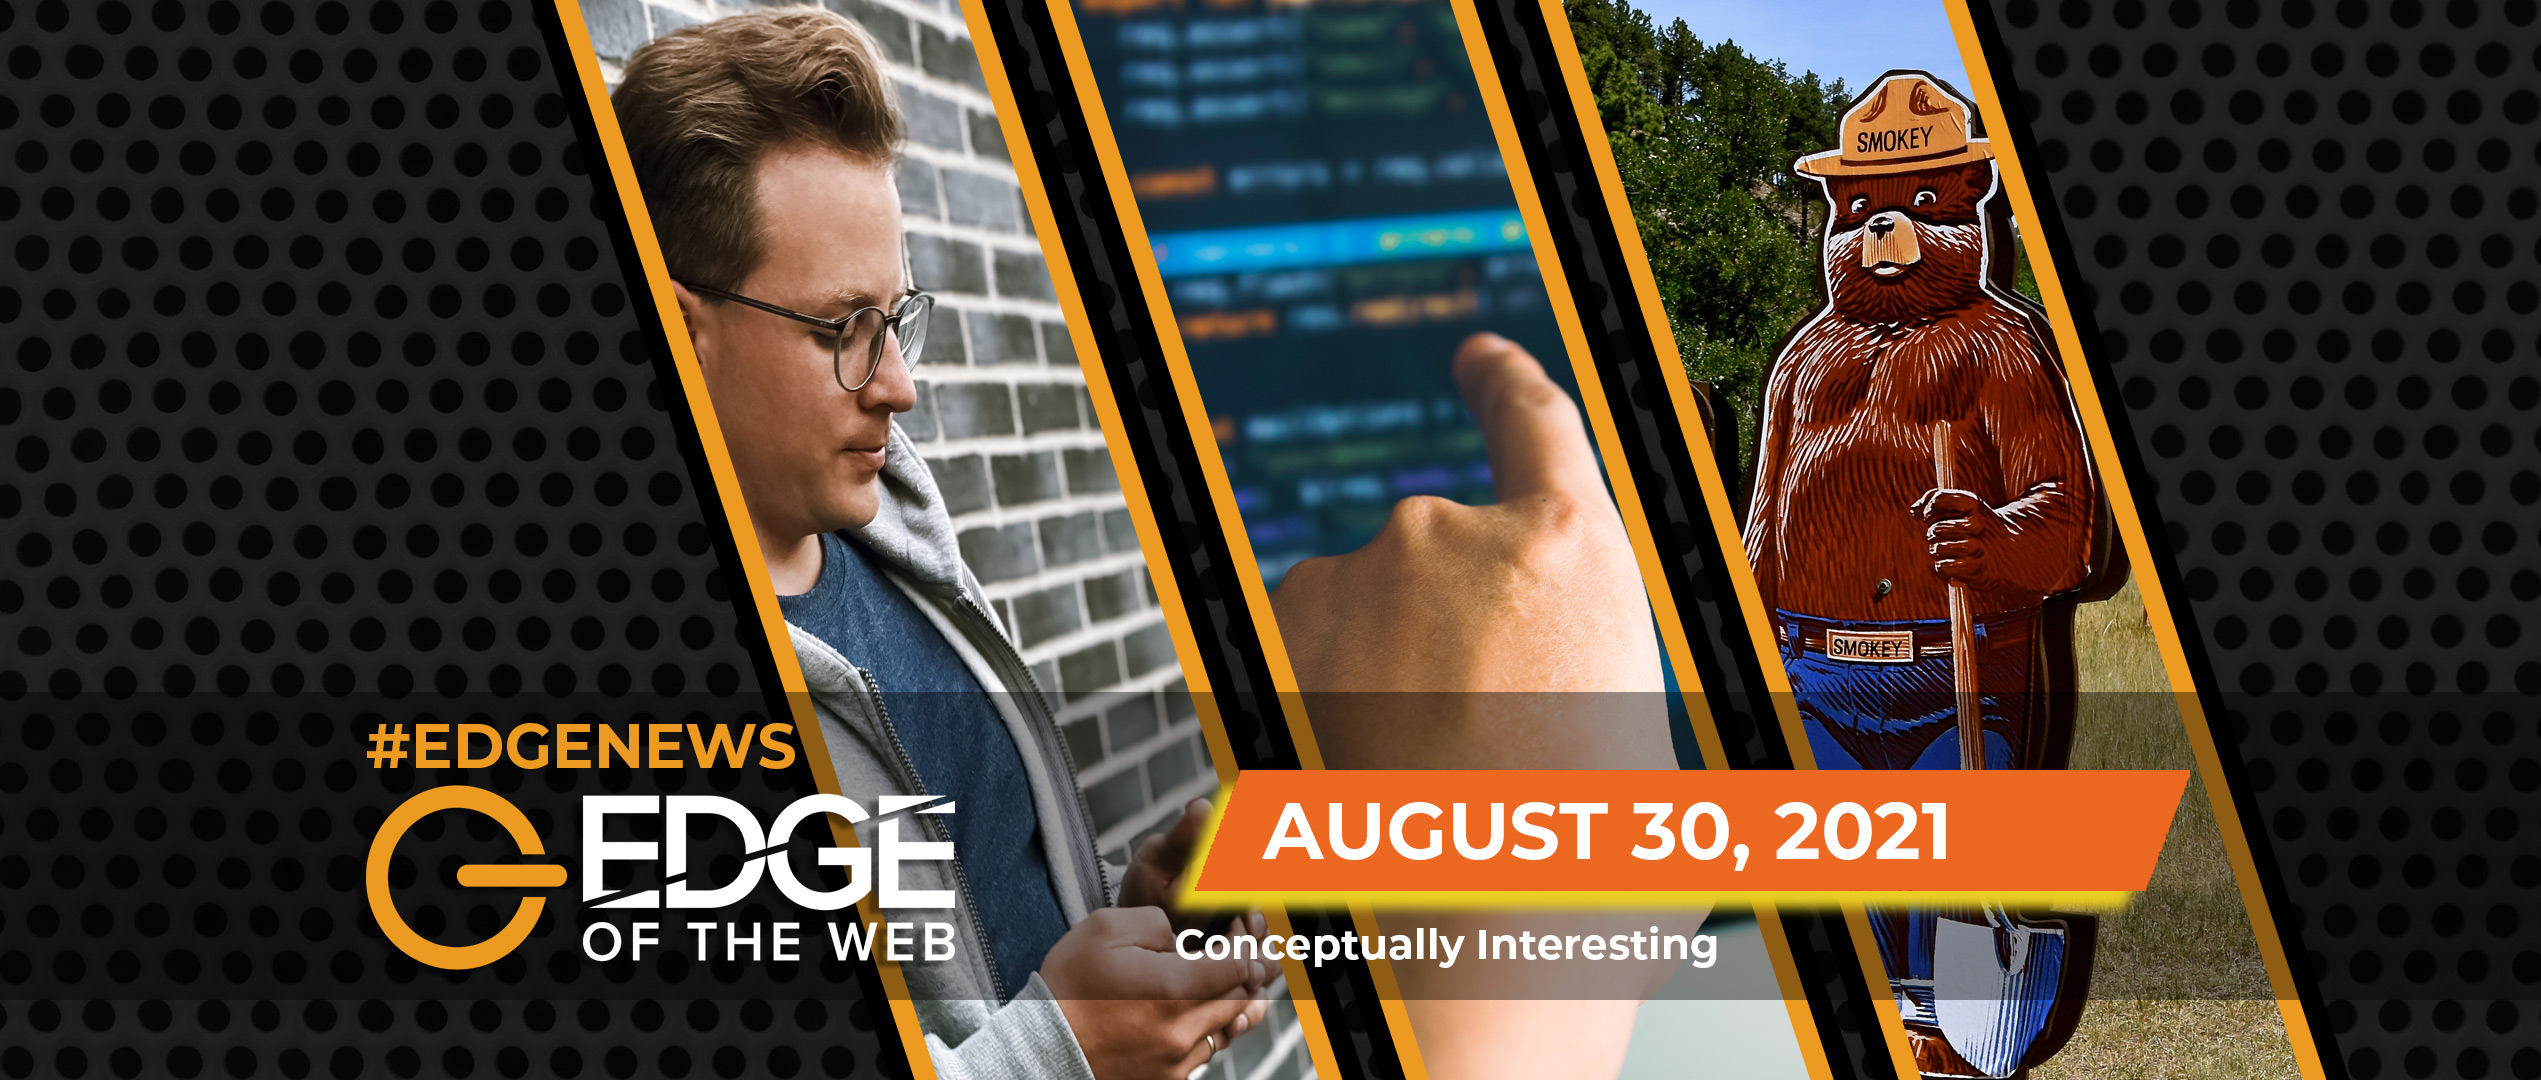 446 | News from the EDGE | Week of 8.30.2021